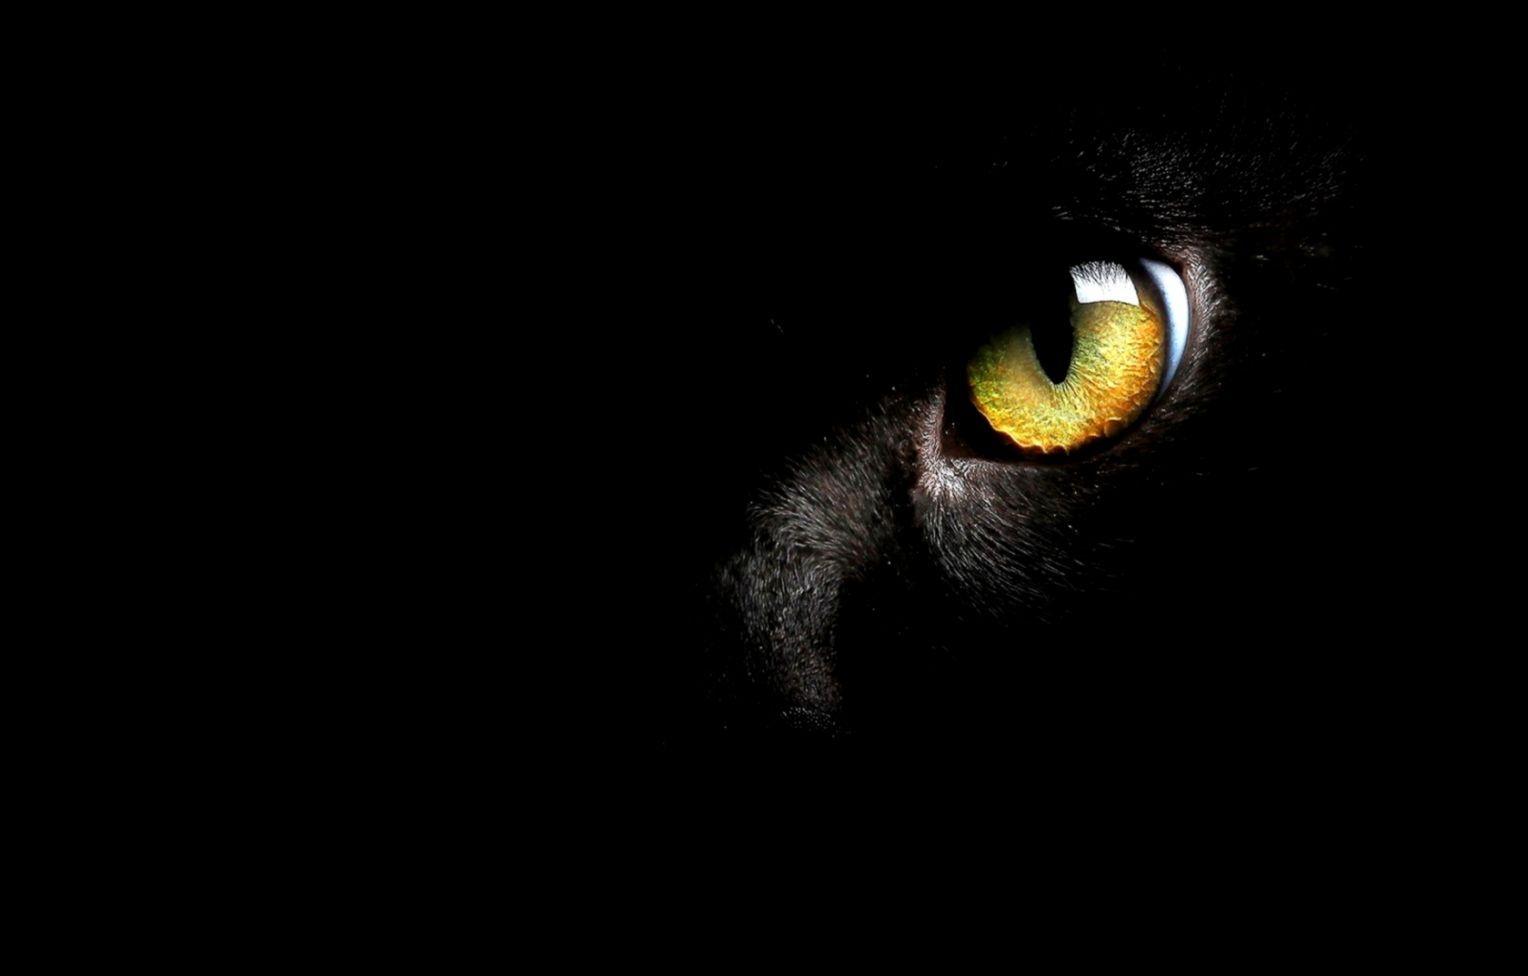 Black Cat Eyes Wallpapers Top Free Black Cat Eyes Backgrounds WallpaperAccess